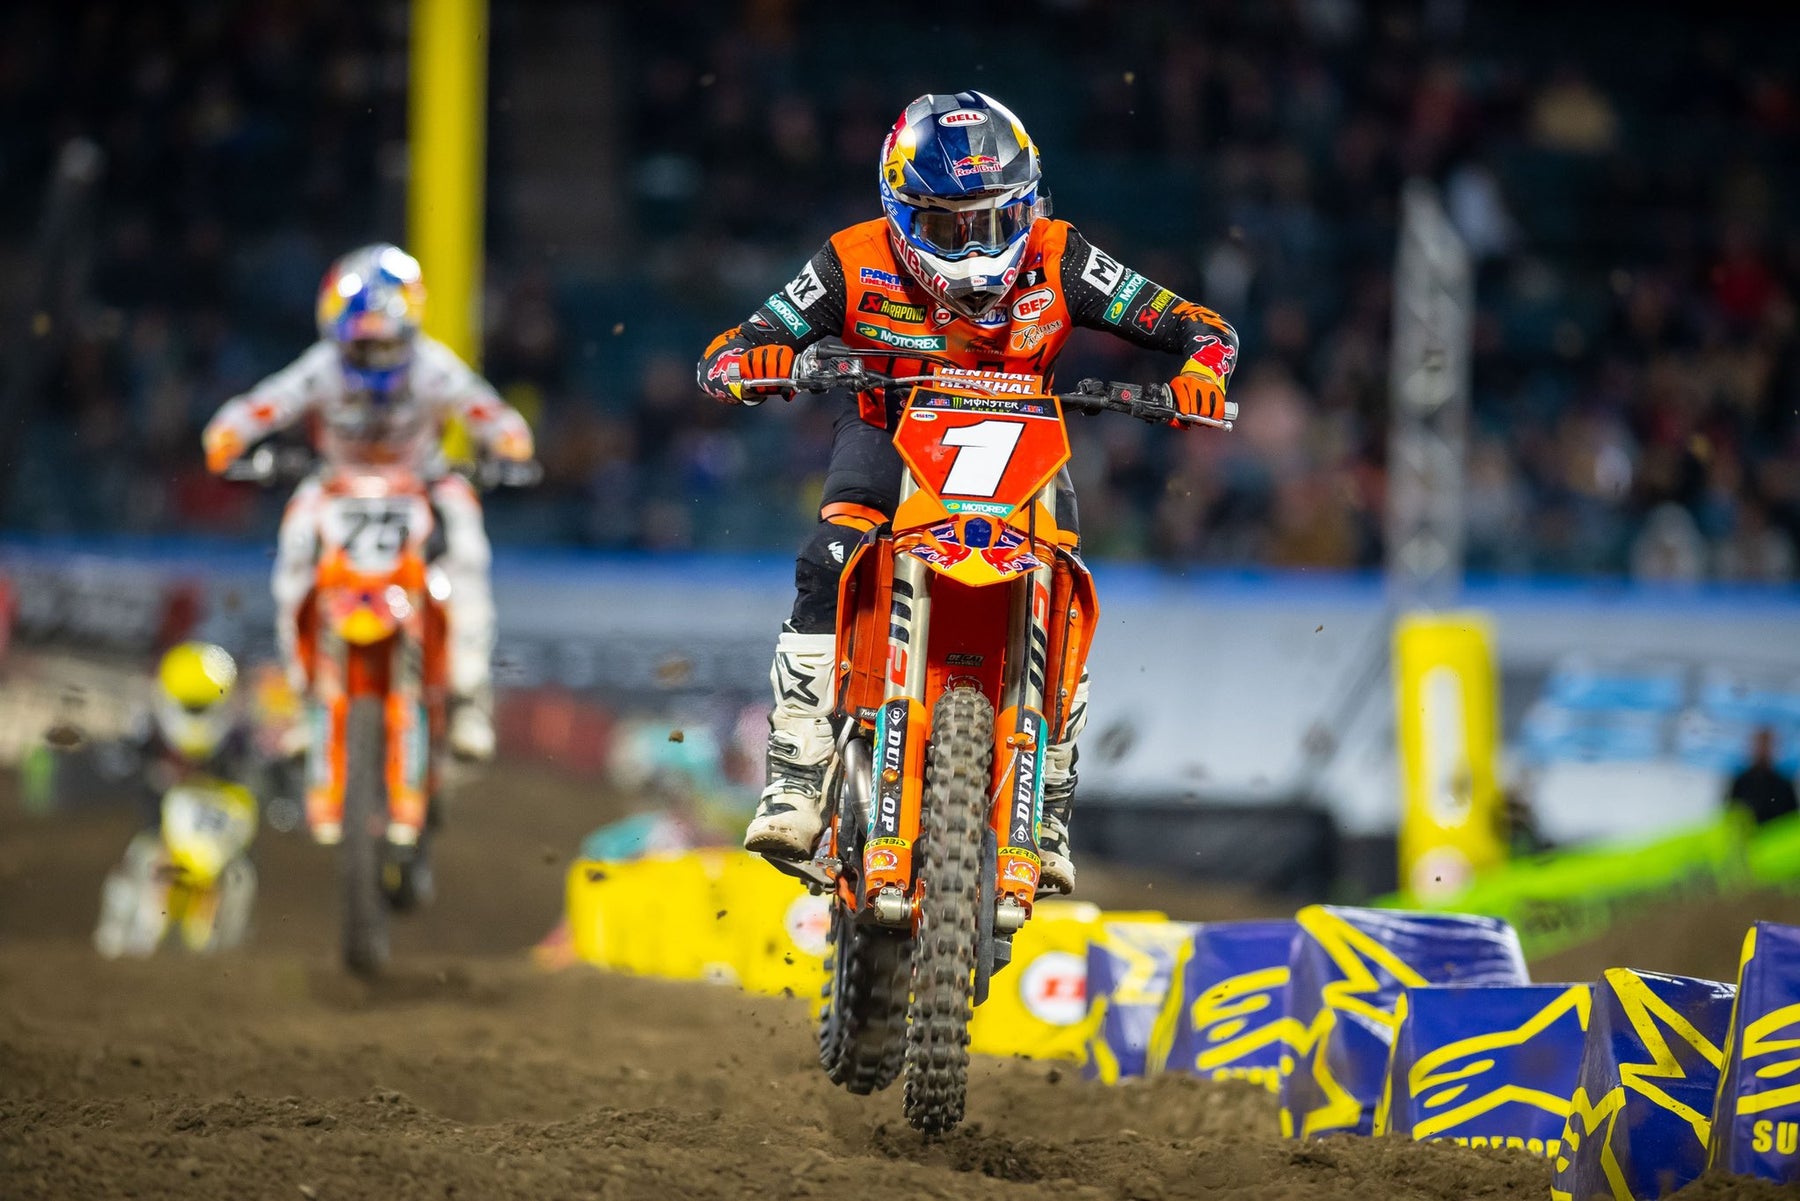 COOPER WEBB AND JUSTIN BARCIA SHINE UNDER THE LIGHTS IN ANAHEIM 1 450SX RACE IN CALIFORNIA